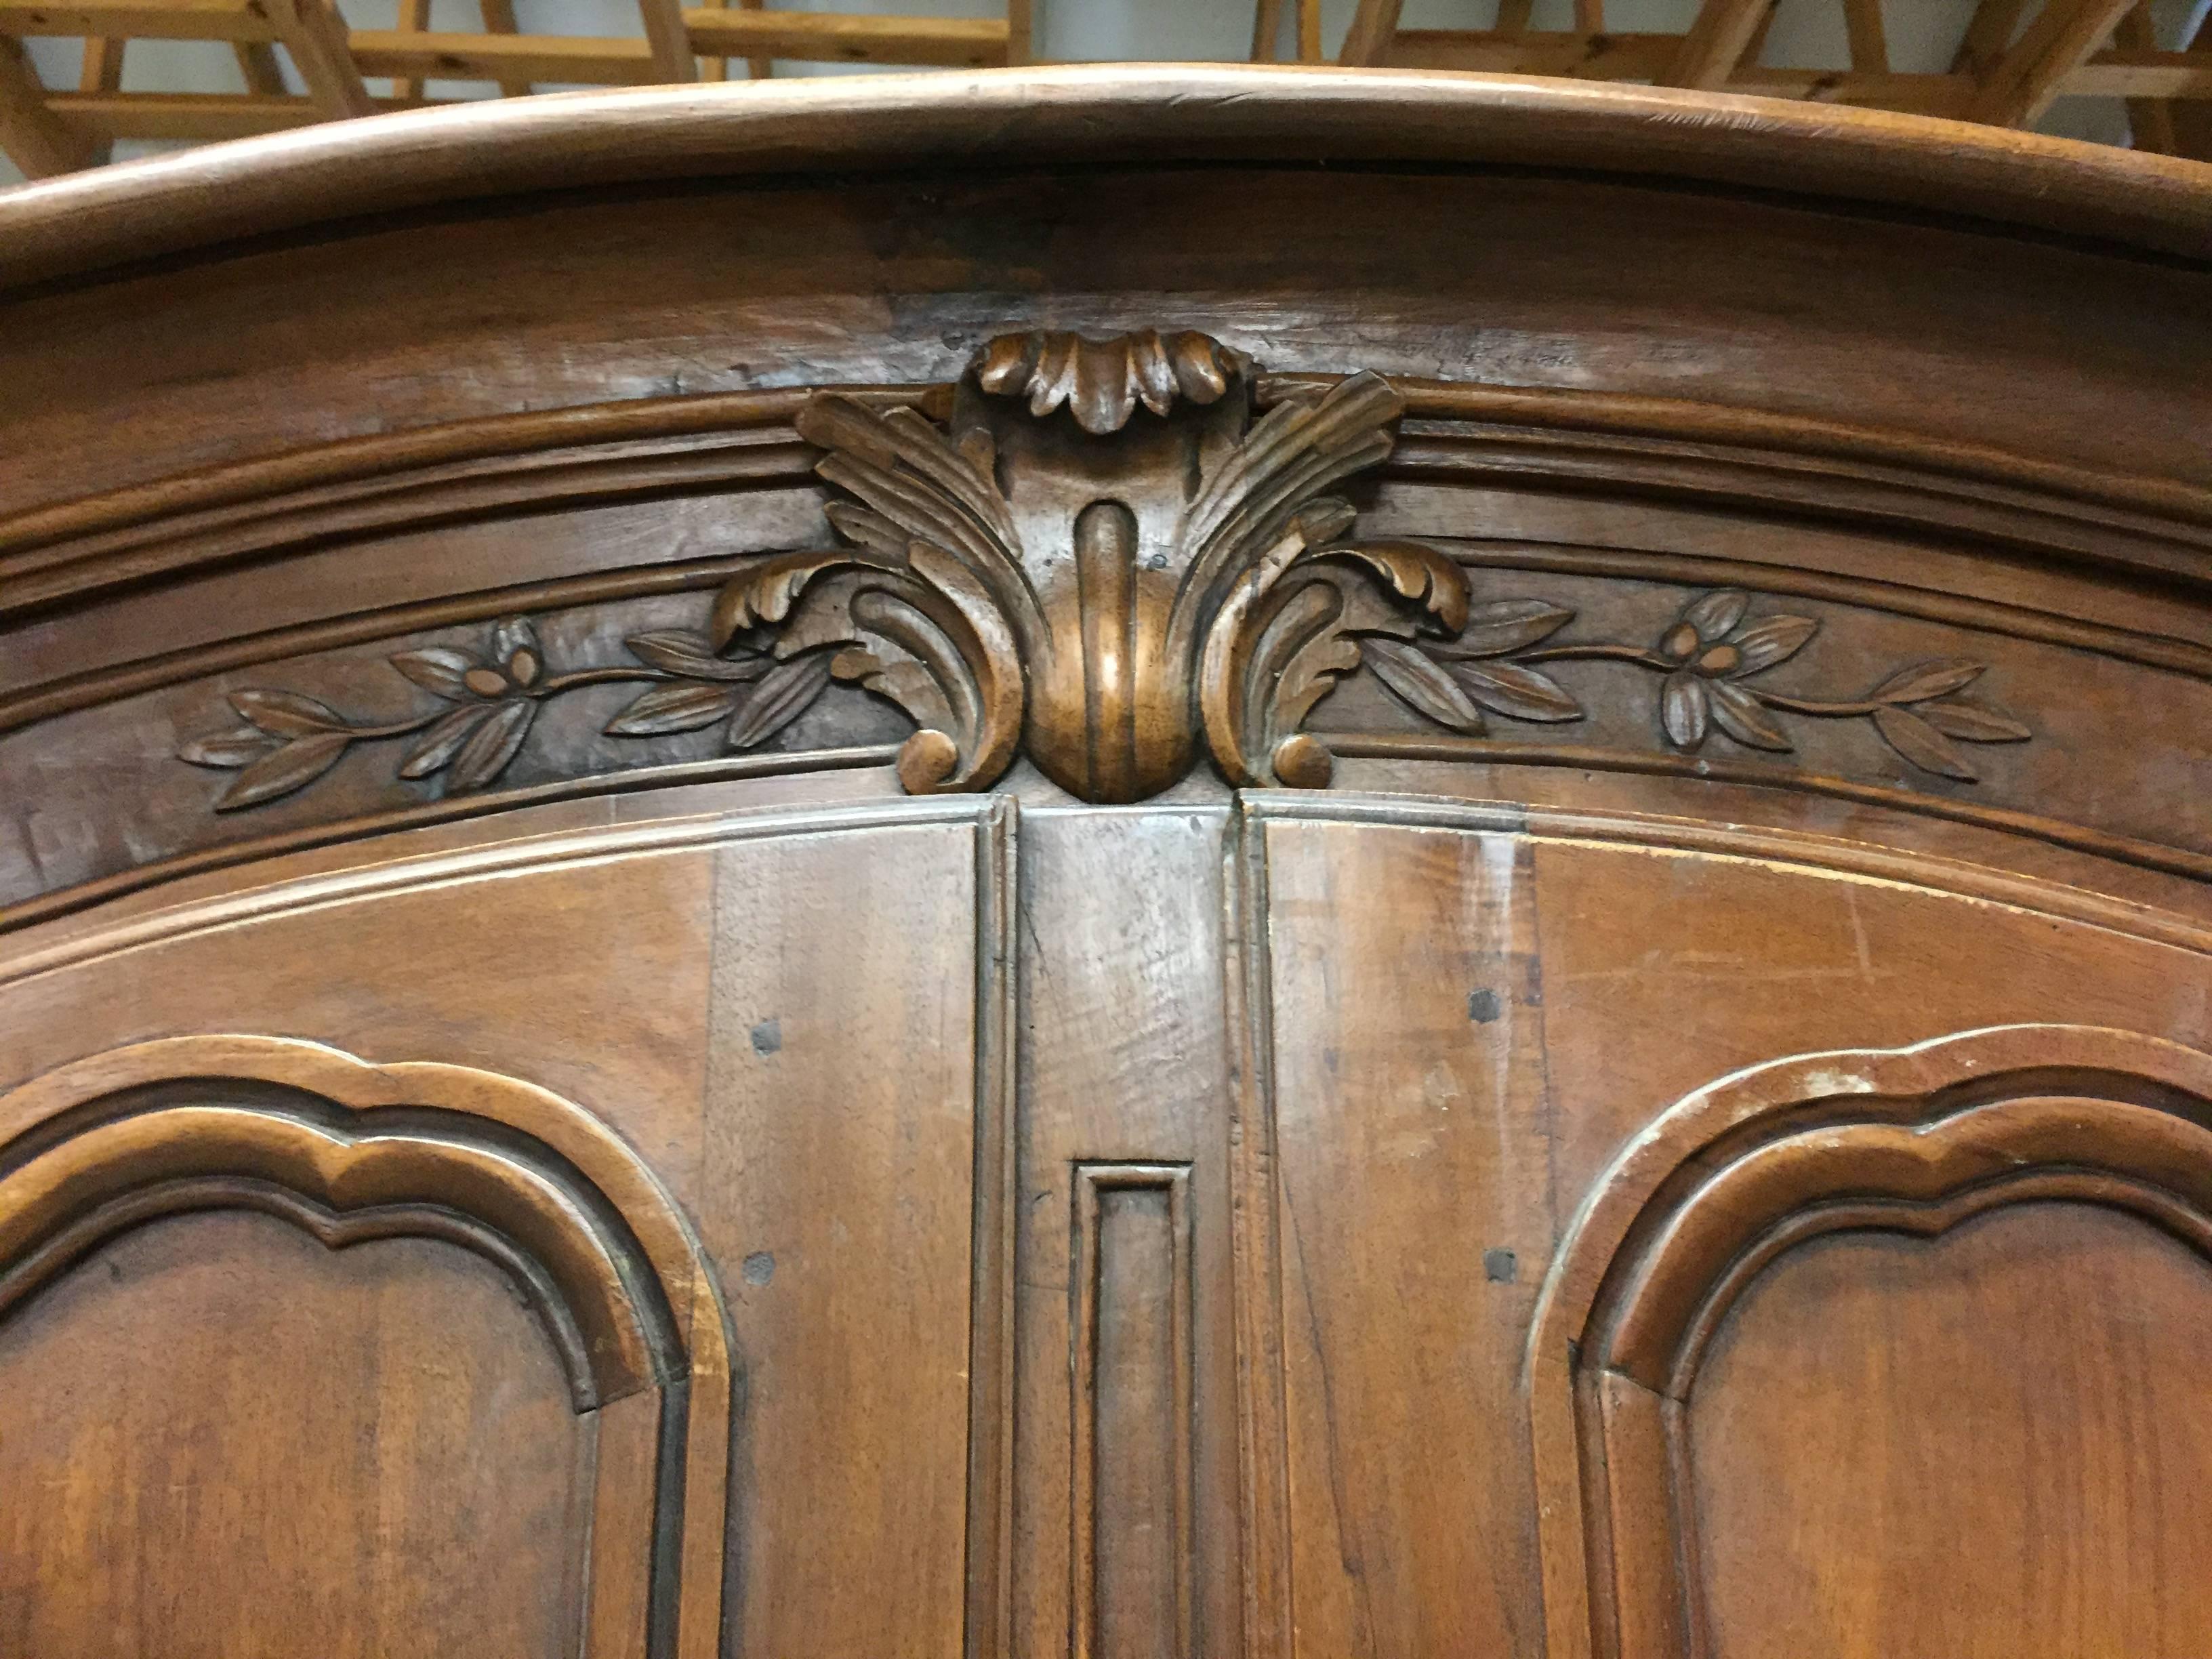 A beautiful armoire in French walnut from the period of Louis XV, who ruled France from 1715-1774. A perfect example from the Lyon region of France. With scalloped apron and carved escargot feet, and original steel lock and hinges.